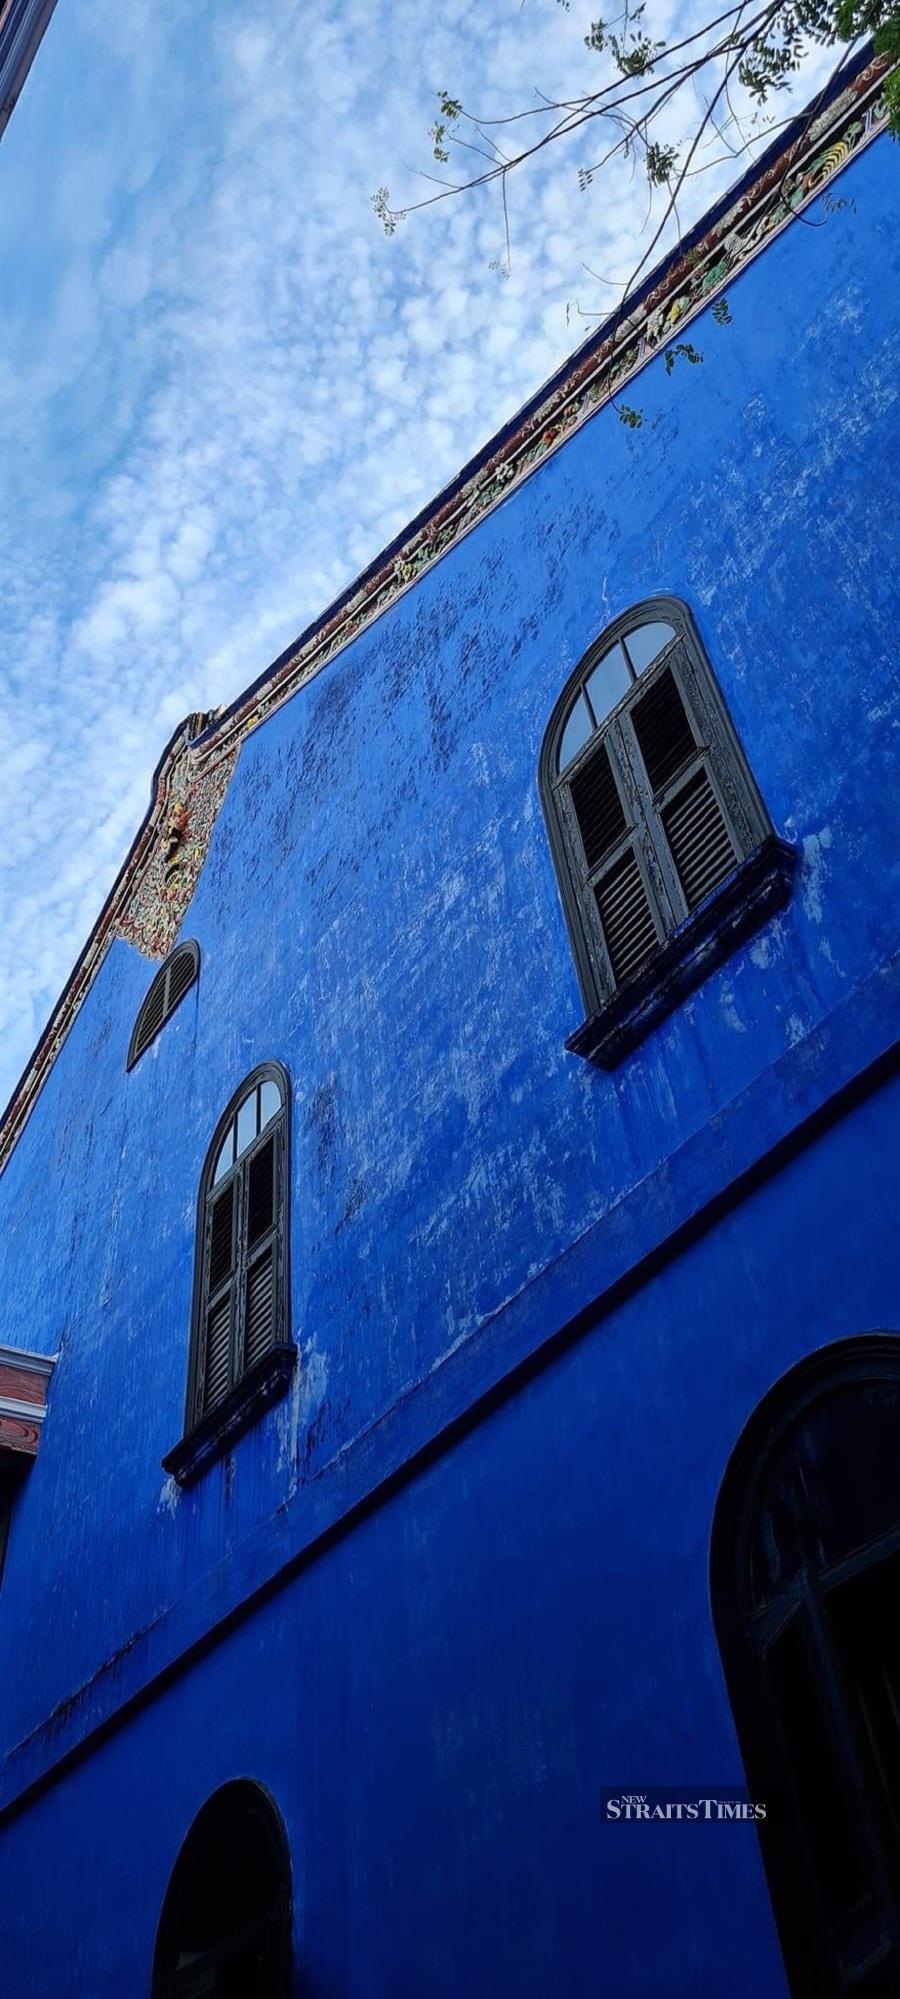  The eye-catching blue paint was made with a natural blue dye from the indigo plant, mixed with limewash. Picture by Evelyne Koshy.